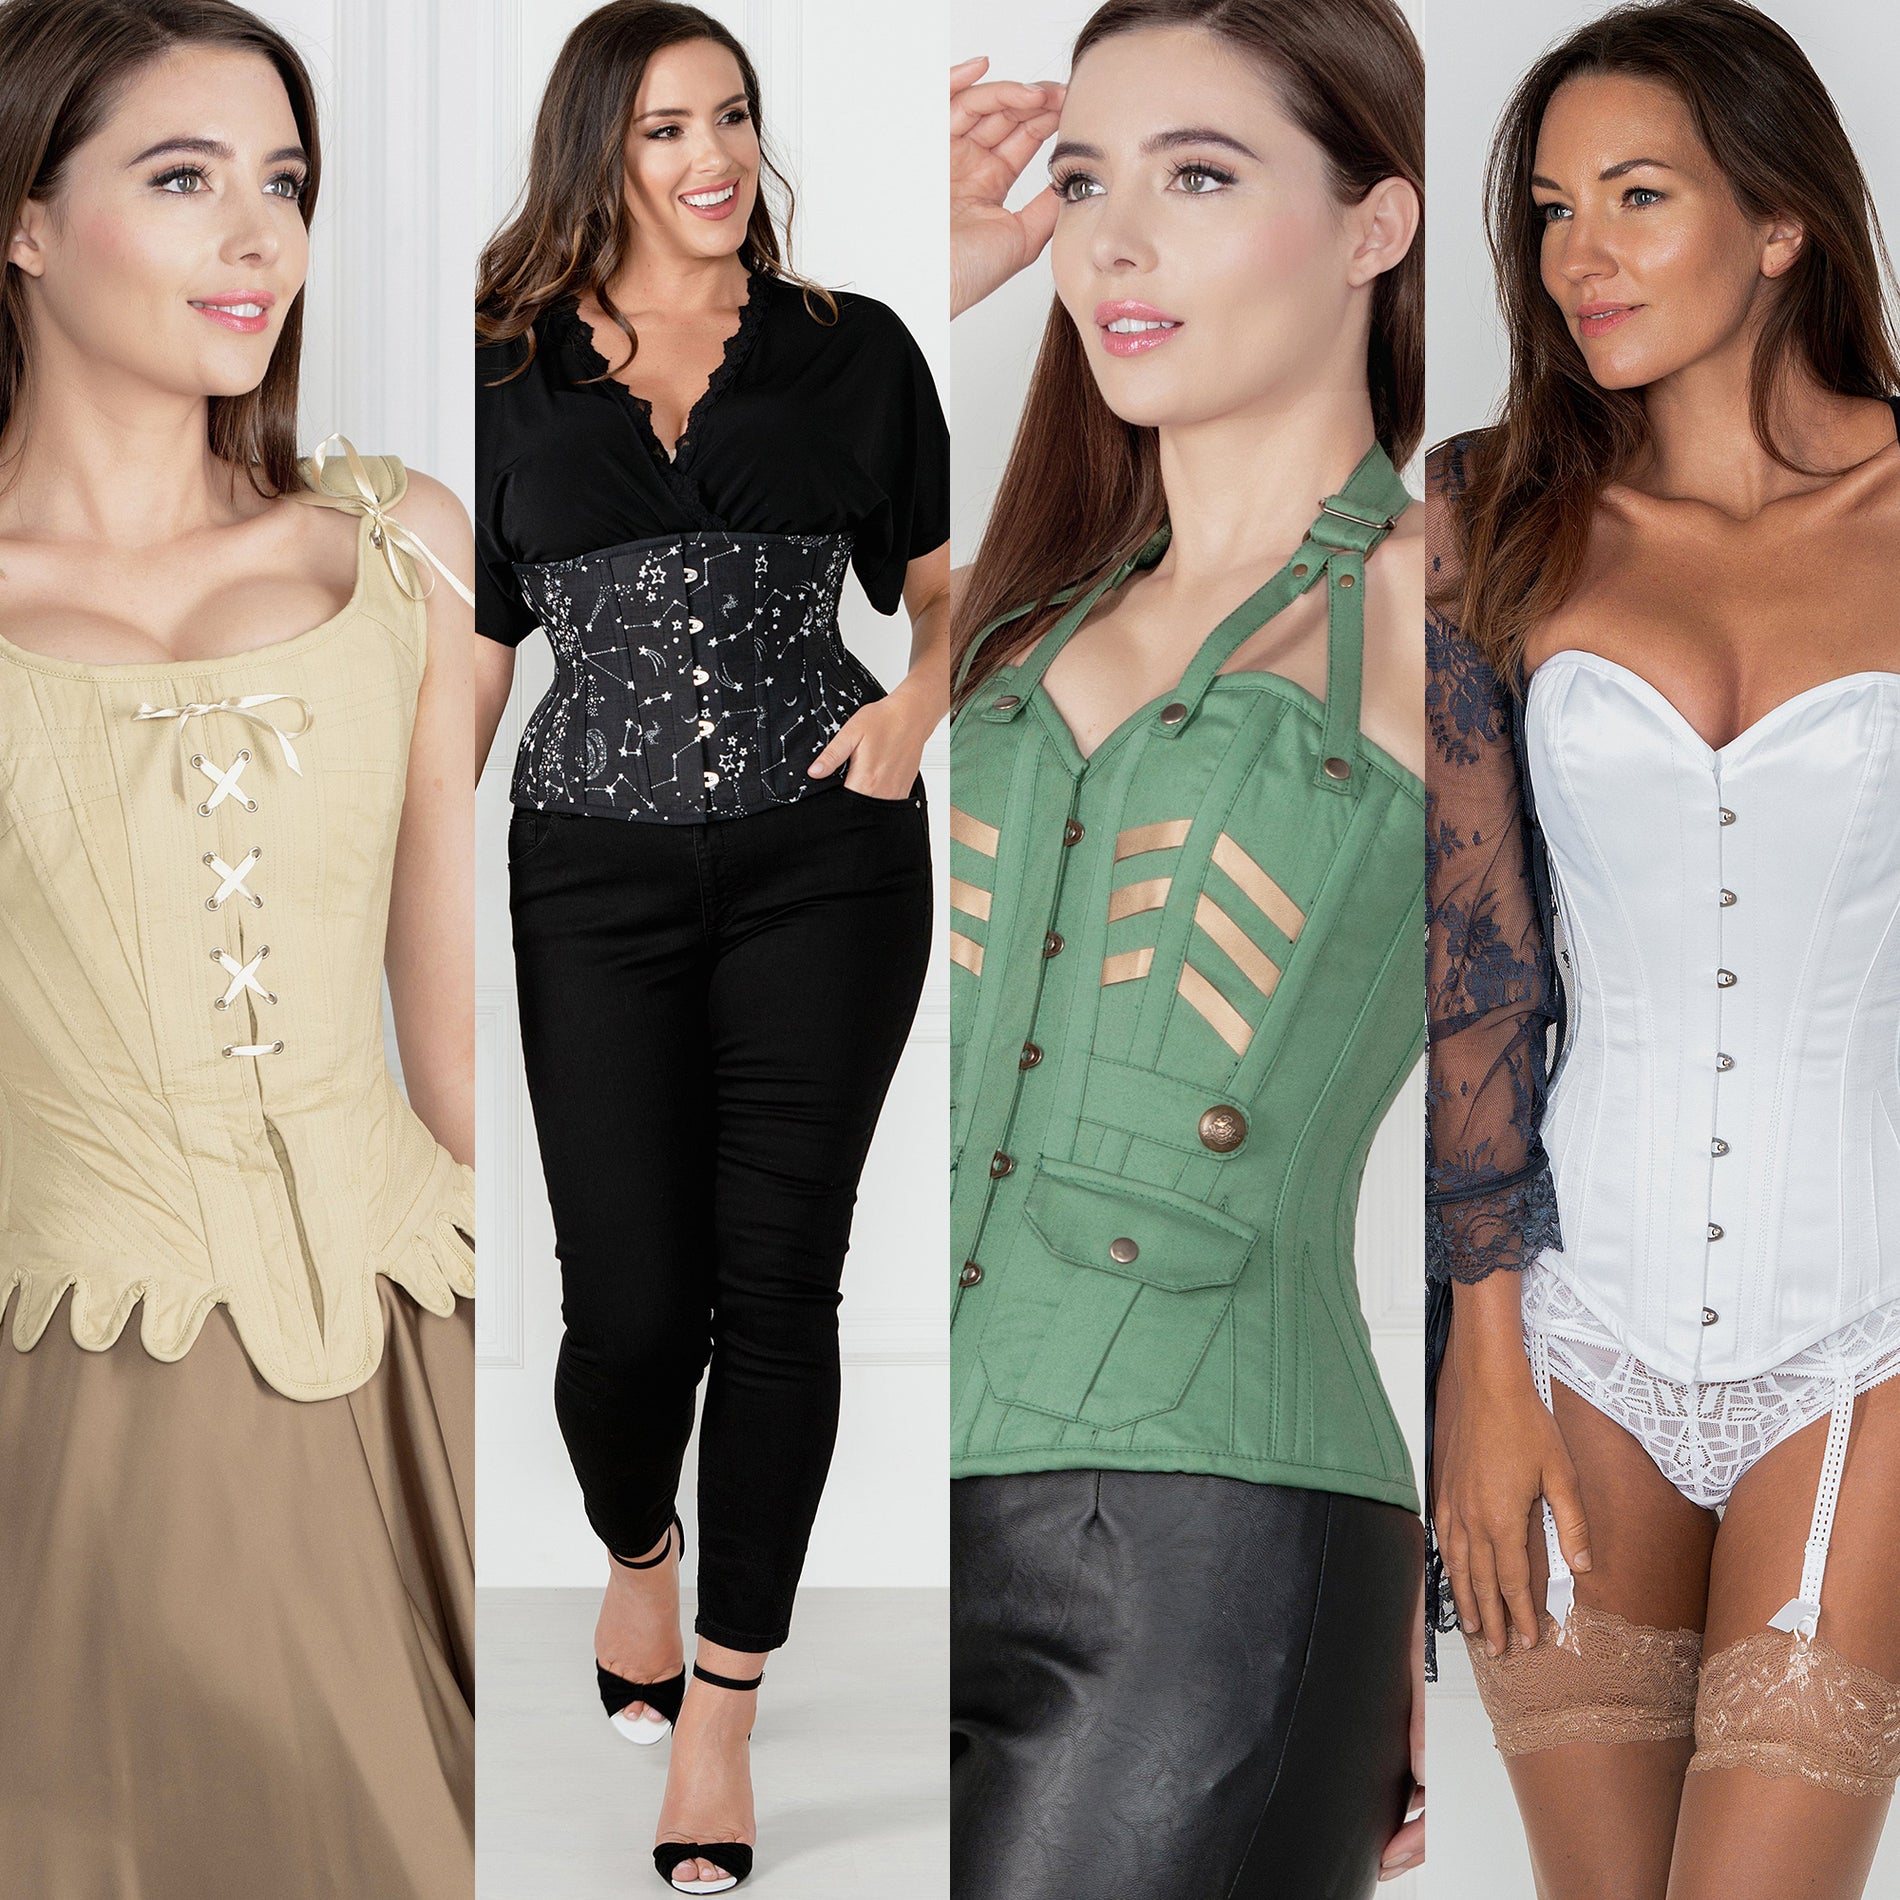 Corsets in the 21st Century: It’s all About Choice